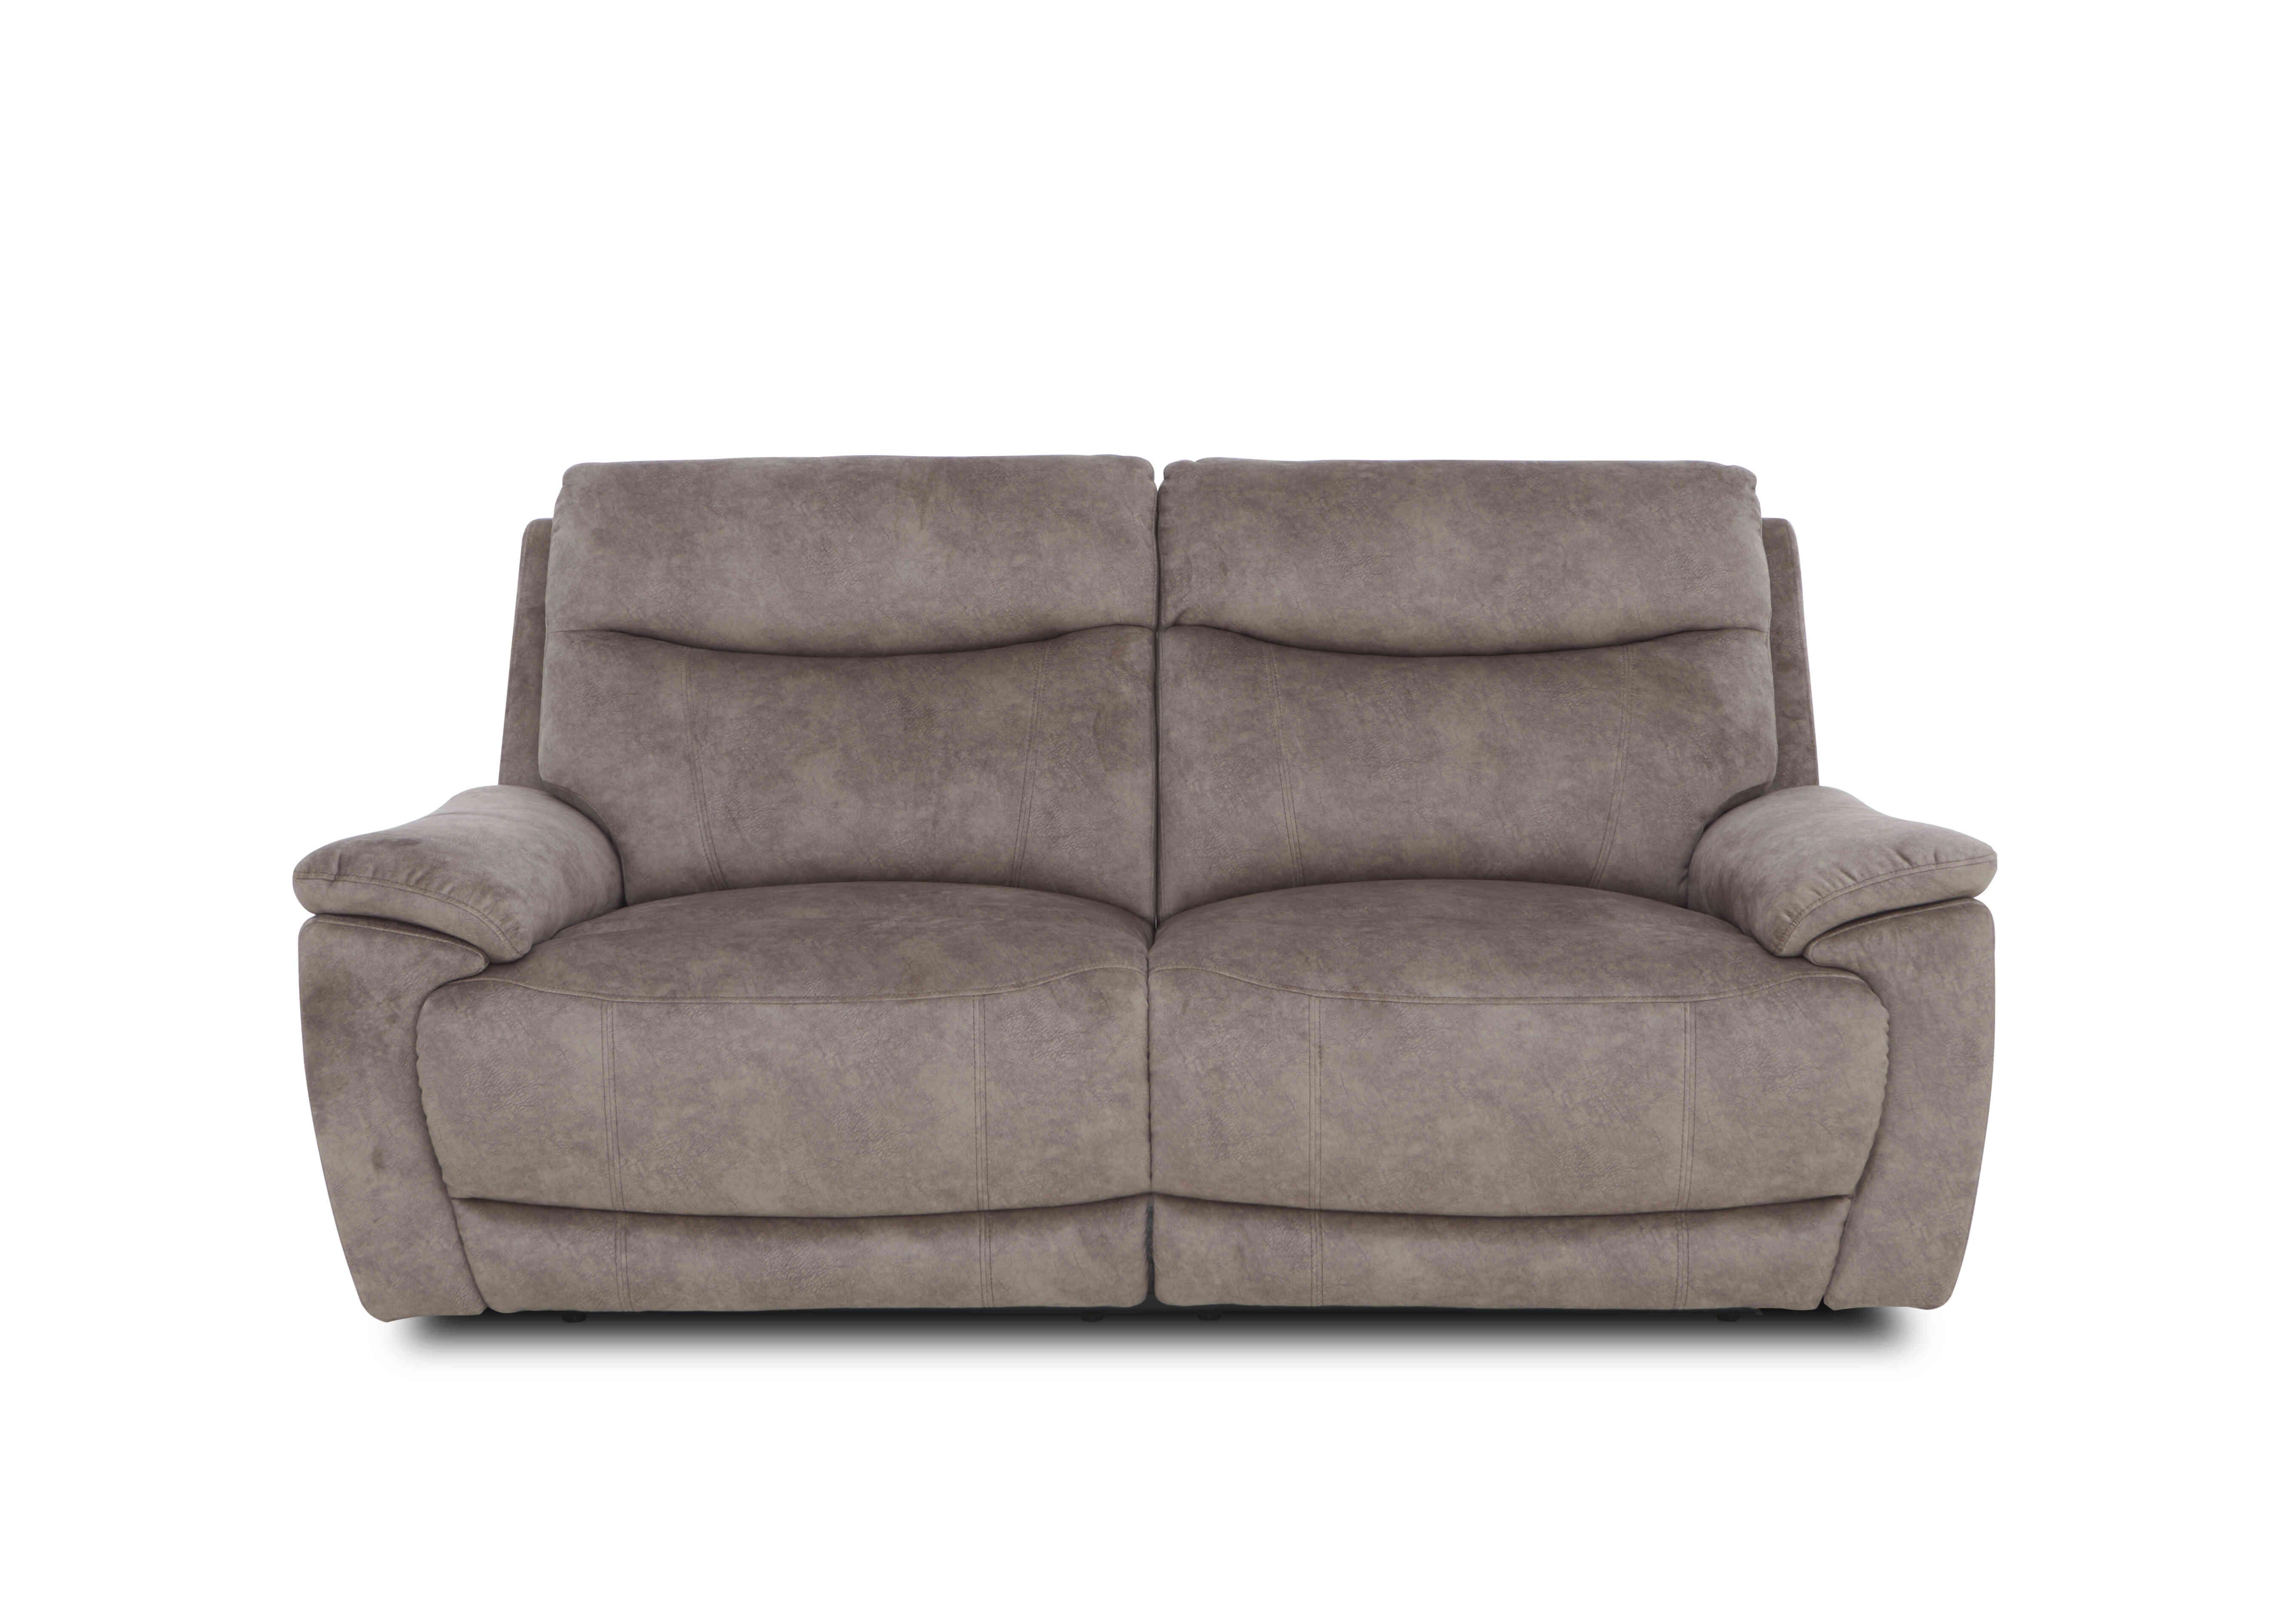 Sloane 3 Seater Fabric Sofa in 18175 Marble Charcoal Grey on Furniture Village